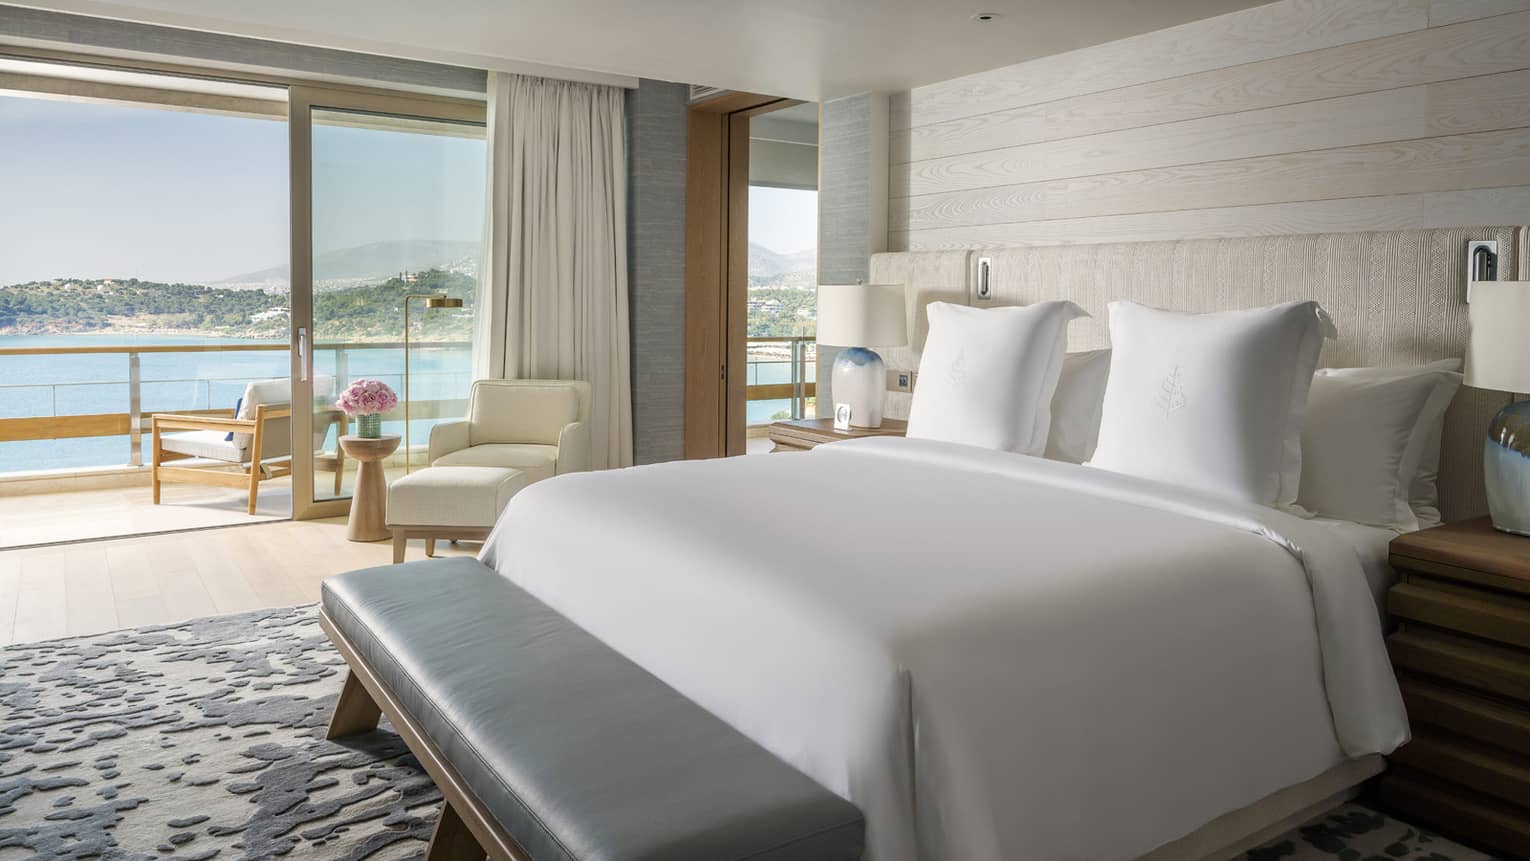 Arion Sea View Suite with white bedding, balcony with chairs overlooking ocean